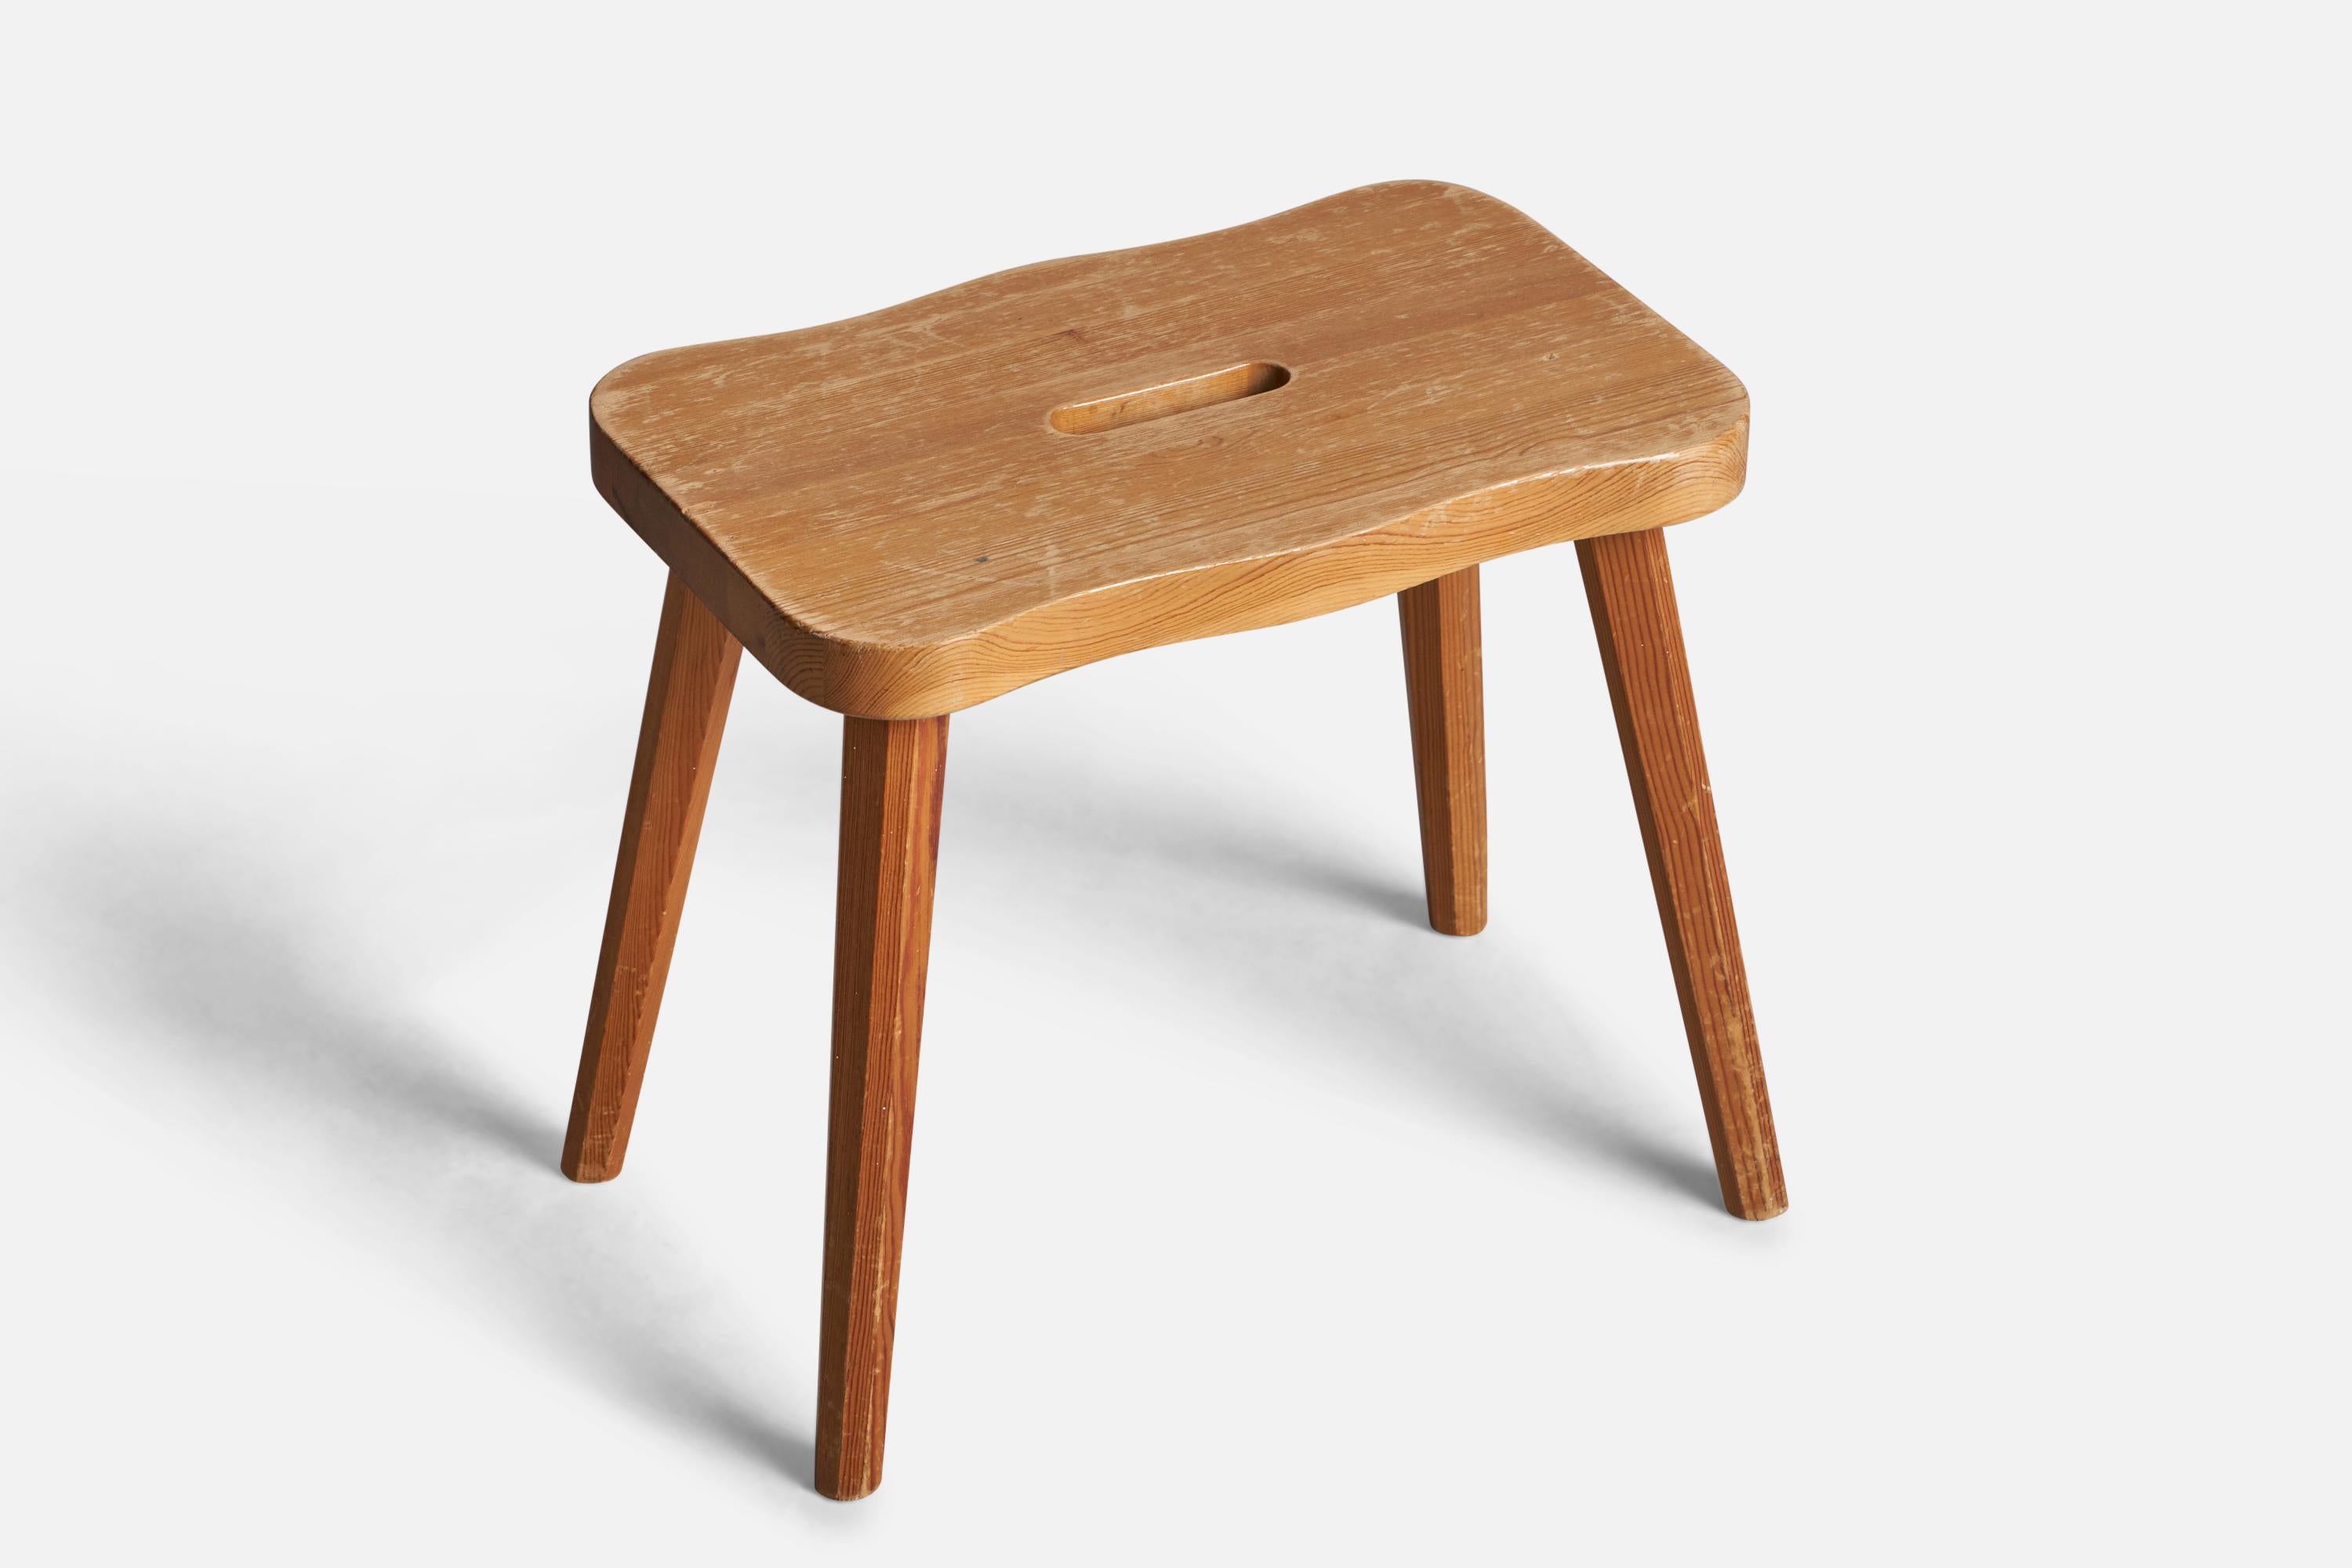 A pine stool designed and produced in Sweden, c. 1970s.